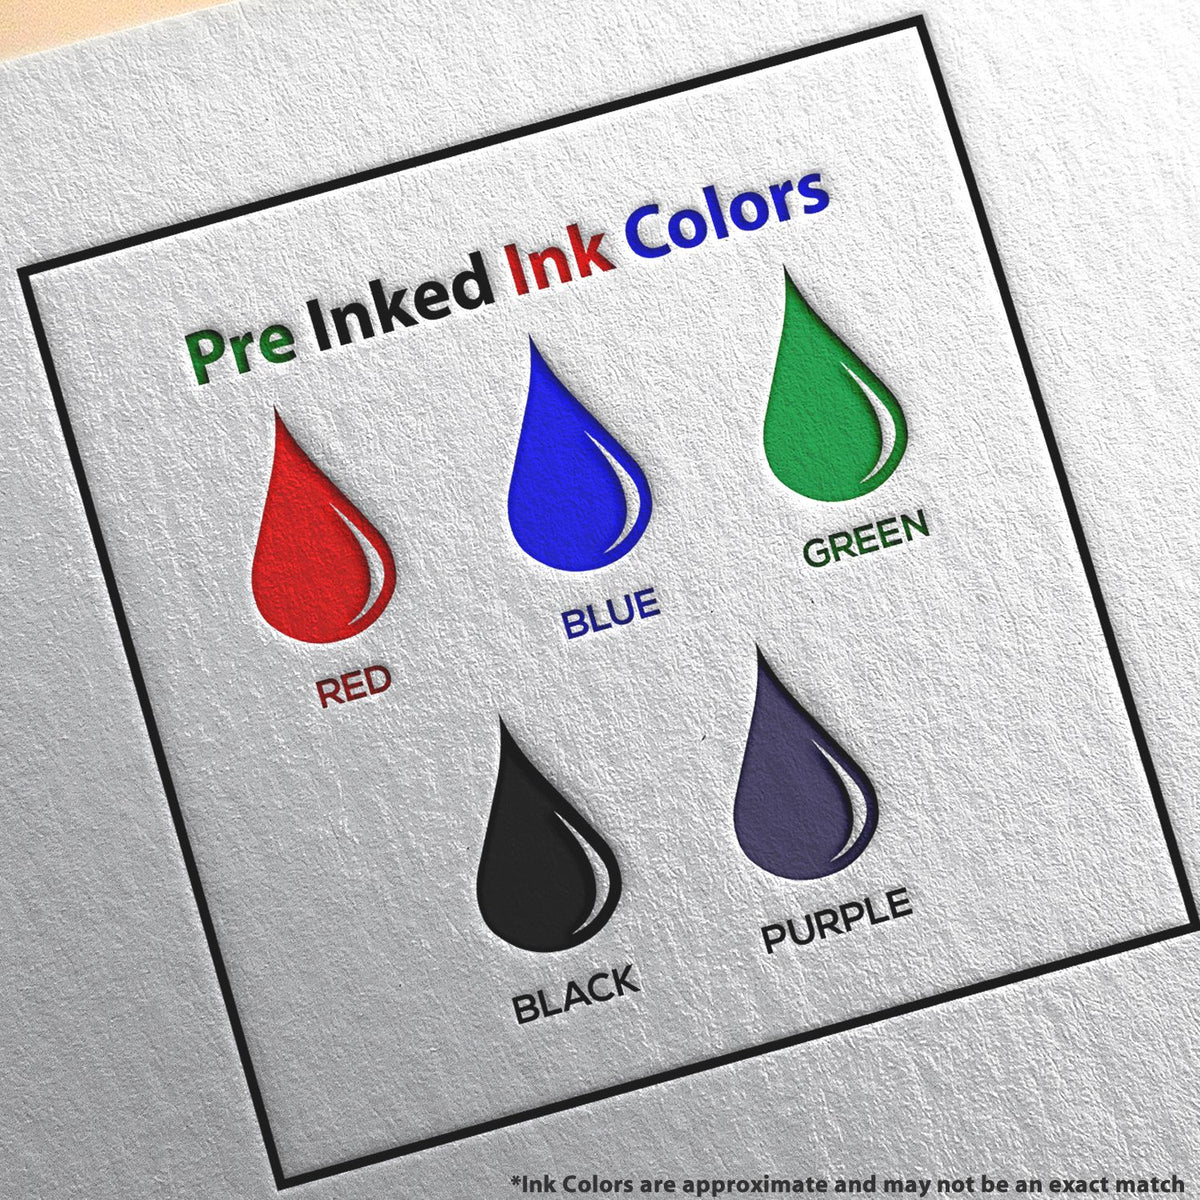 A picture showing the different ink colors or hues available for the Slim Pre-Inked North Carolina Land Surveyor Seal Stamp product.